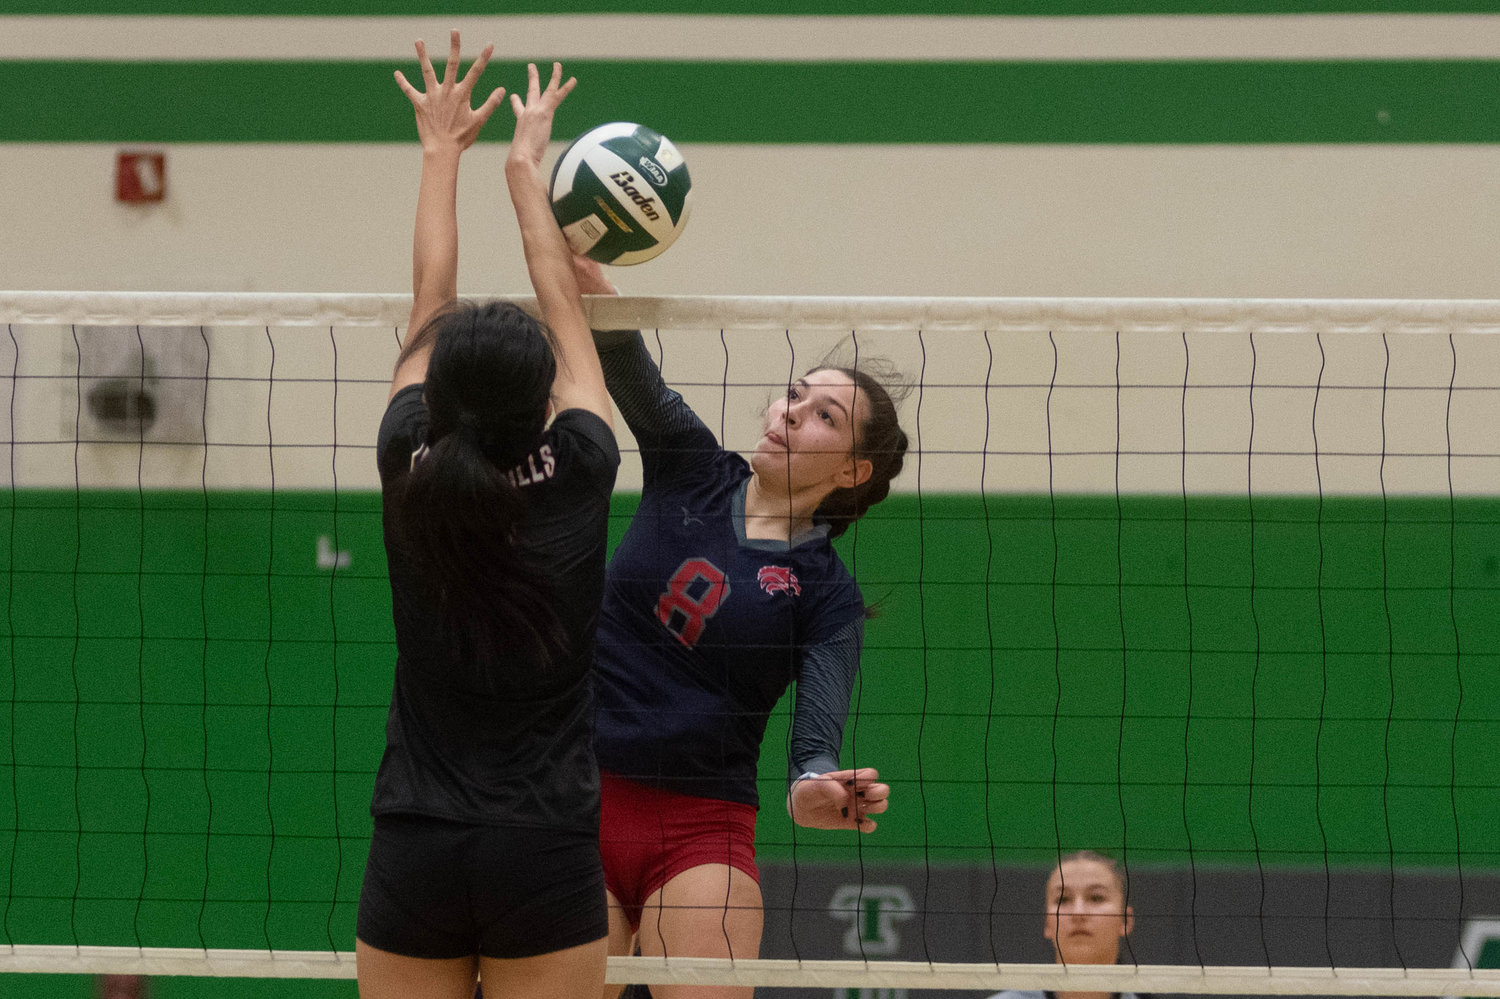 Black Hills middle Payton Childers spikes a ball over the net against R.A. Long in the opening round of the 2A District 4 tournament in Tumwater Nov. 11.